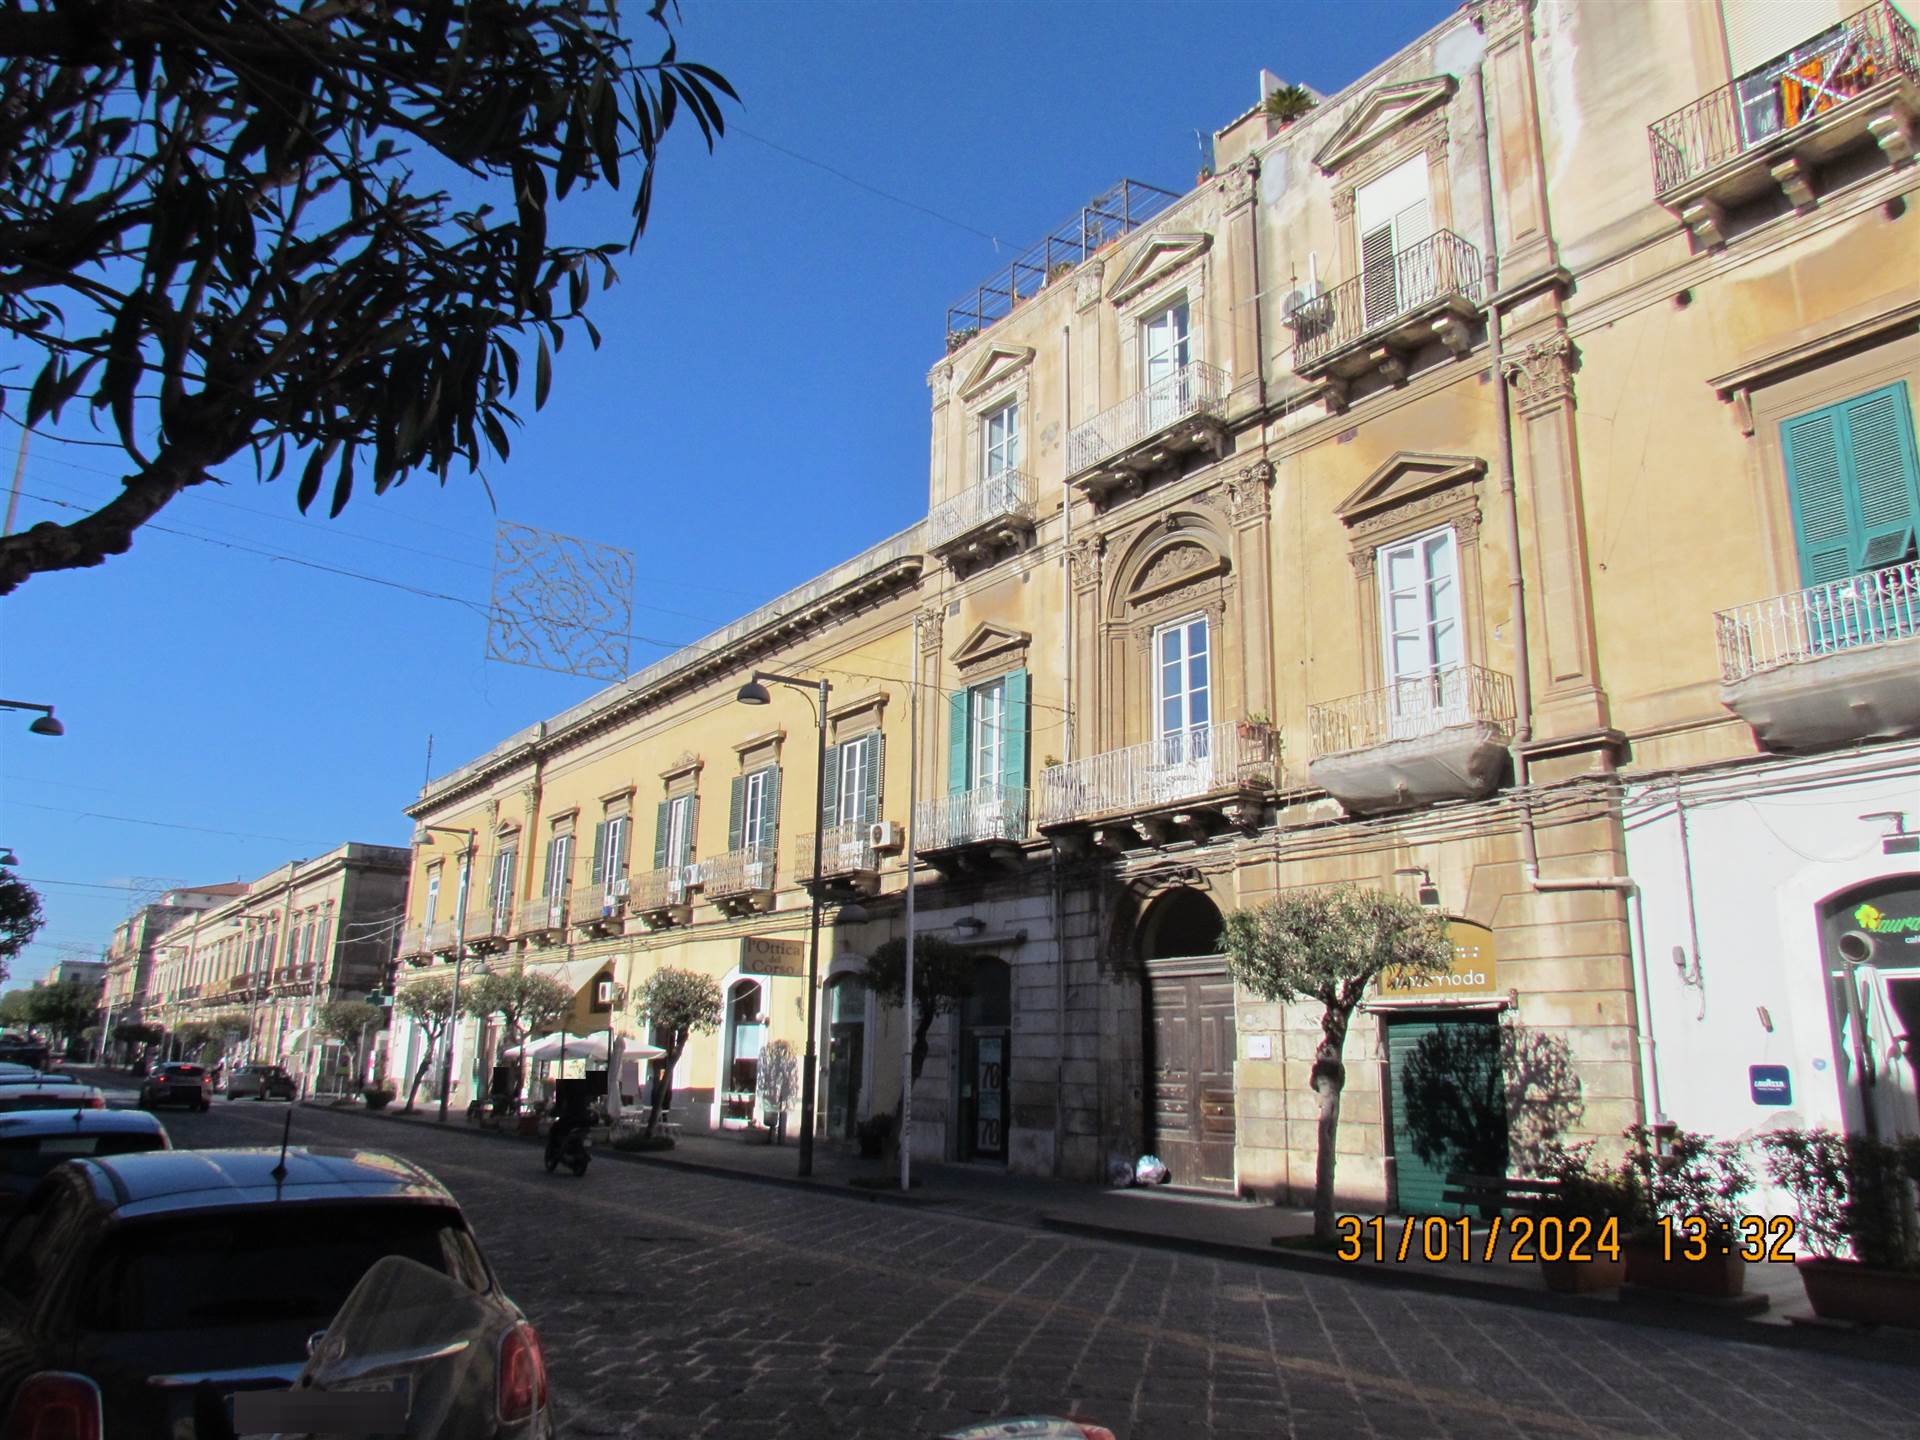 Apartment for sale in Syracuse, located in the renowned Corso Umberto. The 57 sqm property is situated on the second floor of a building with a 